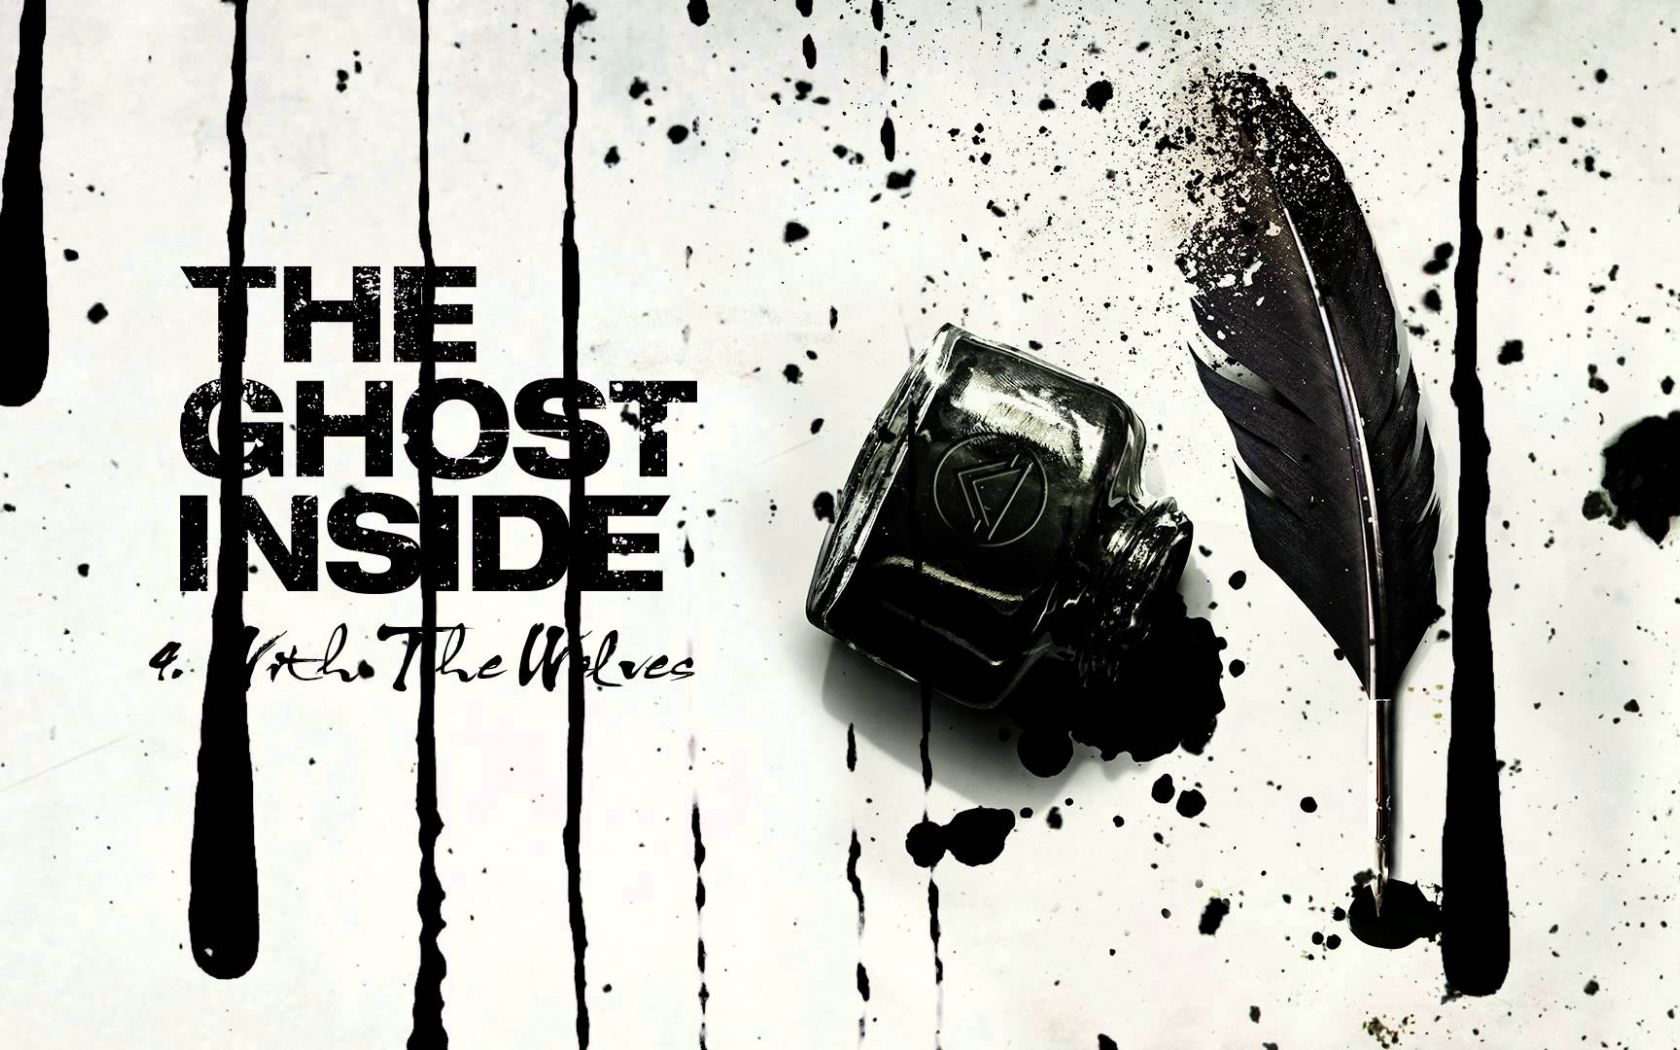 Free download THE GHOST INSIDE WALLPAPERS FREE Wallpaper